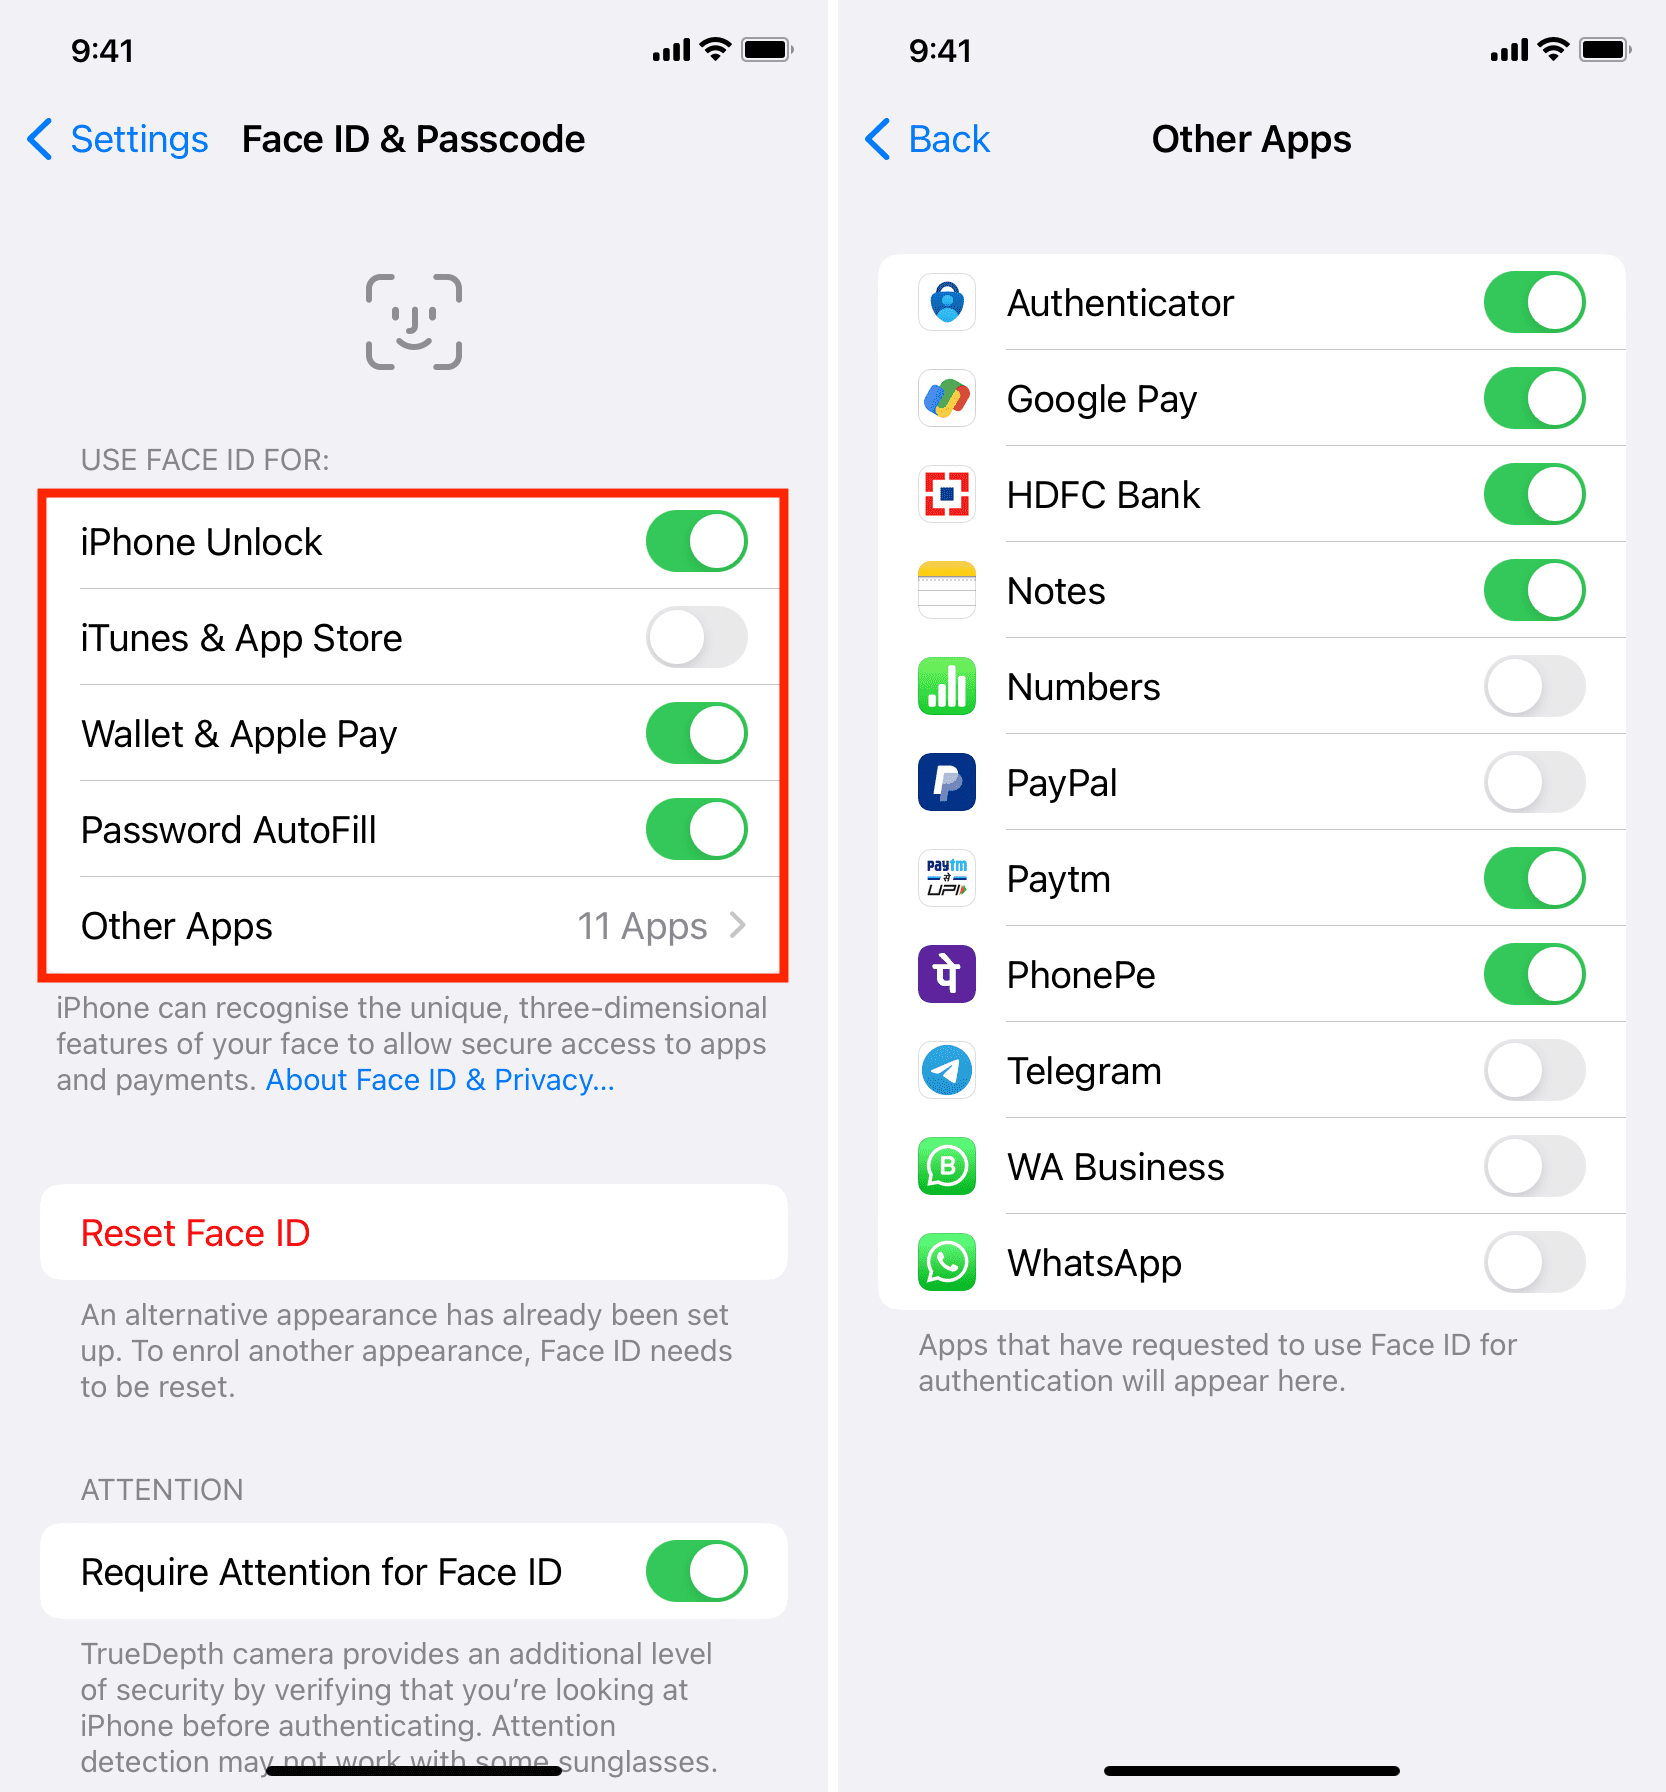 Set Face ID to unlock iPhone and authenticate elsewhere